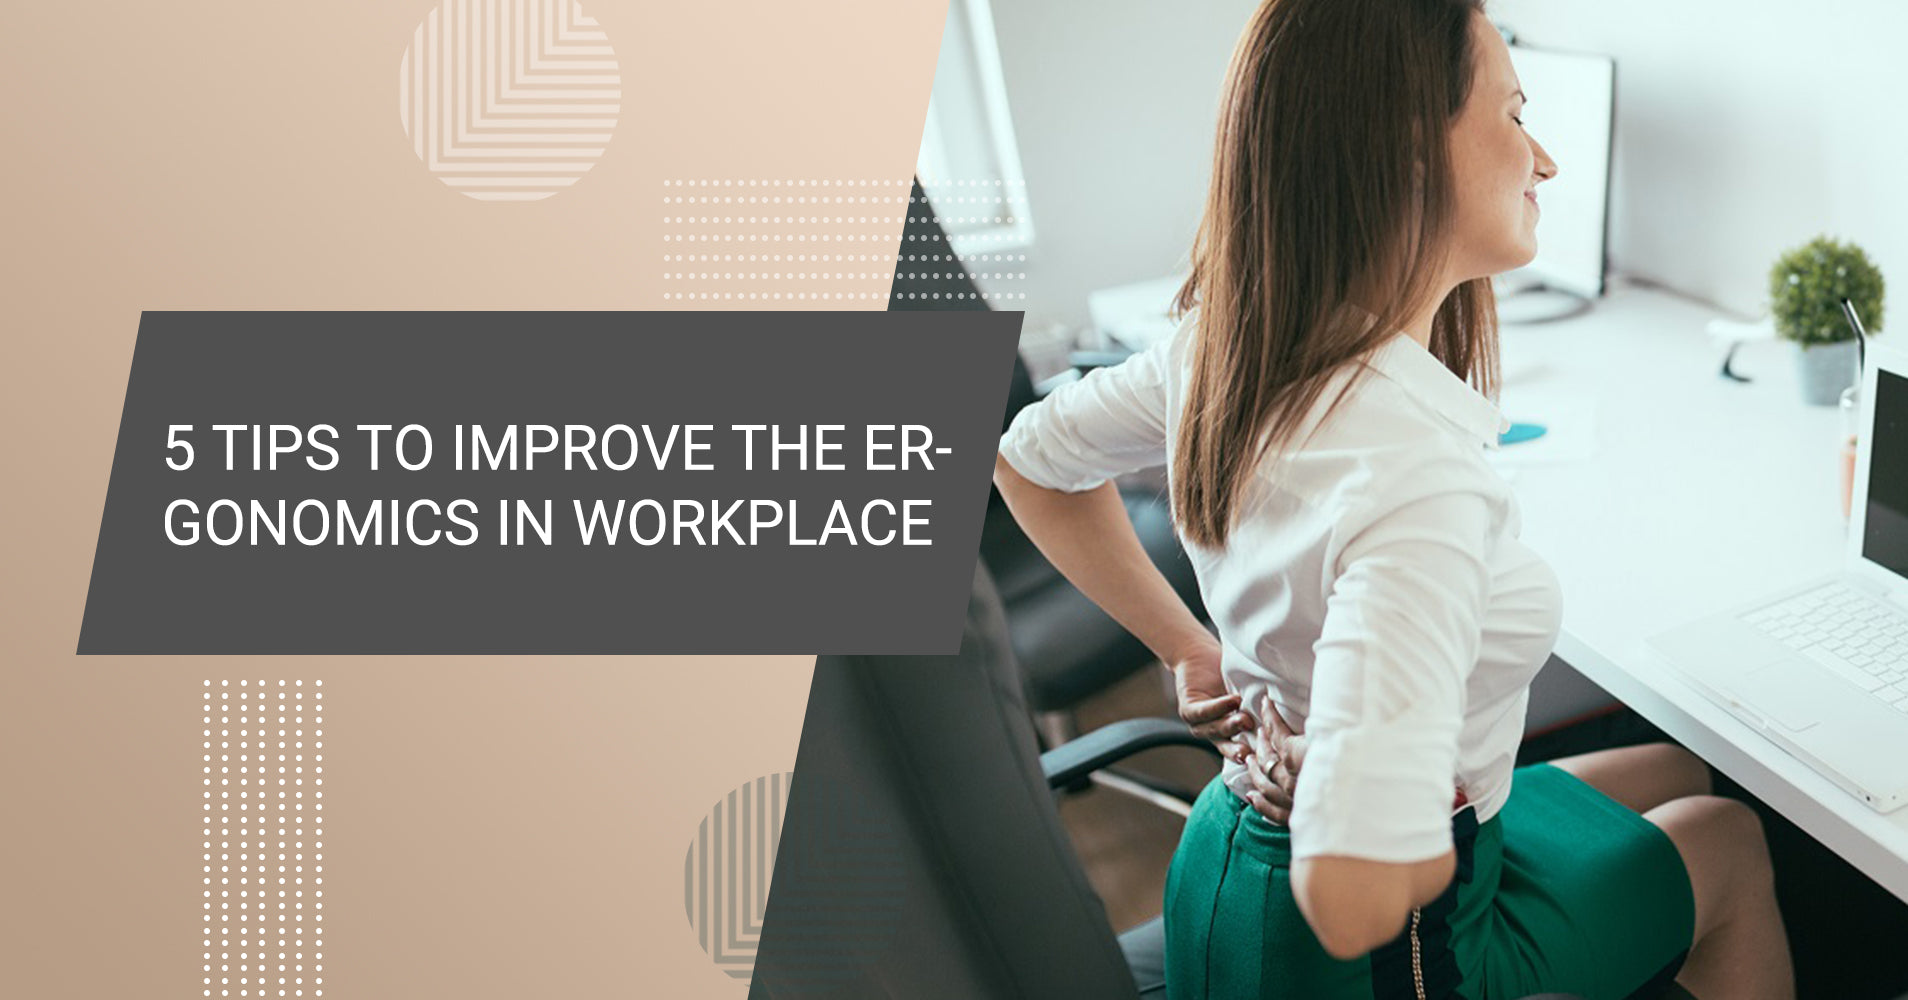 5 Tips to Improve the Ergonomics in Workplace